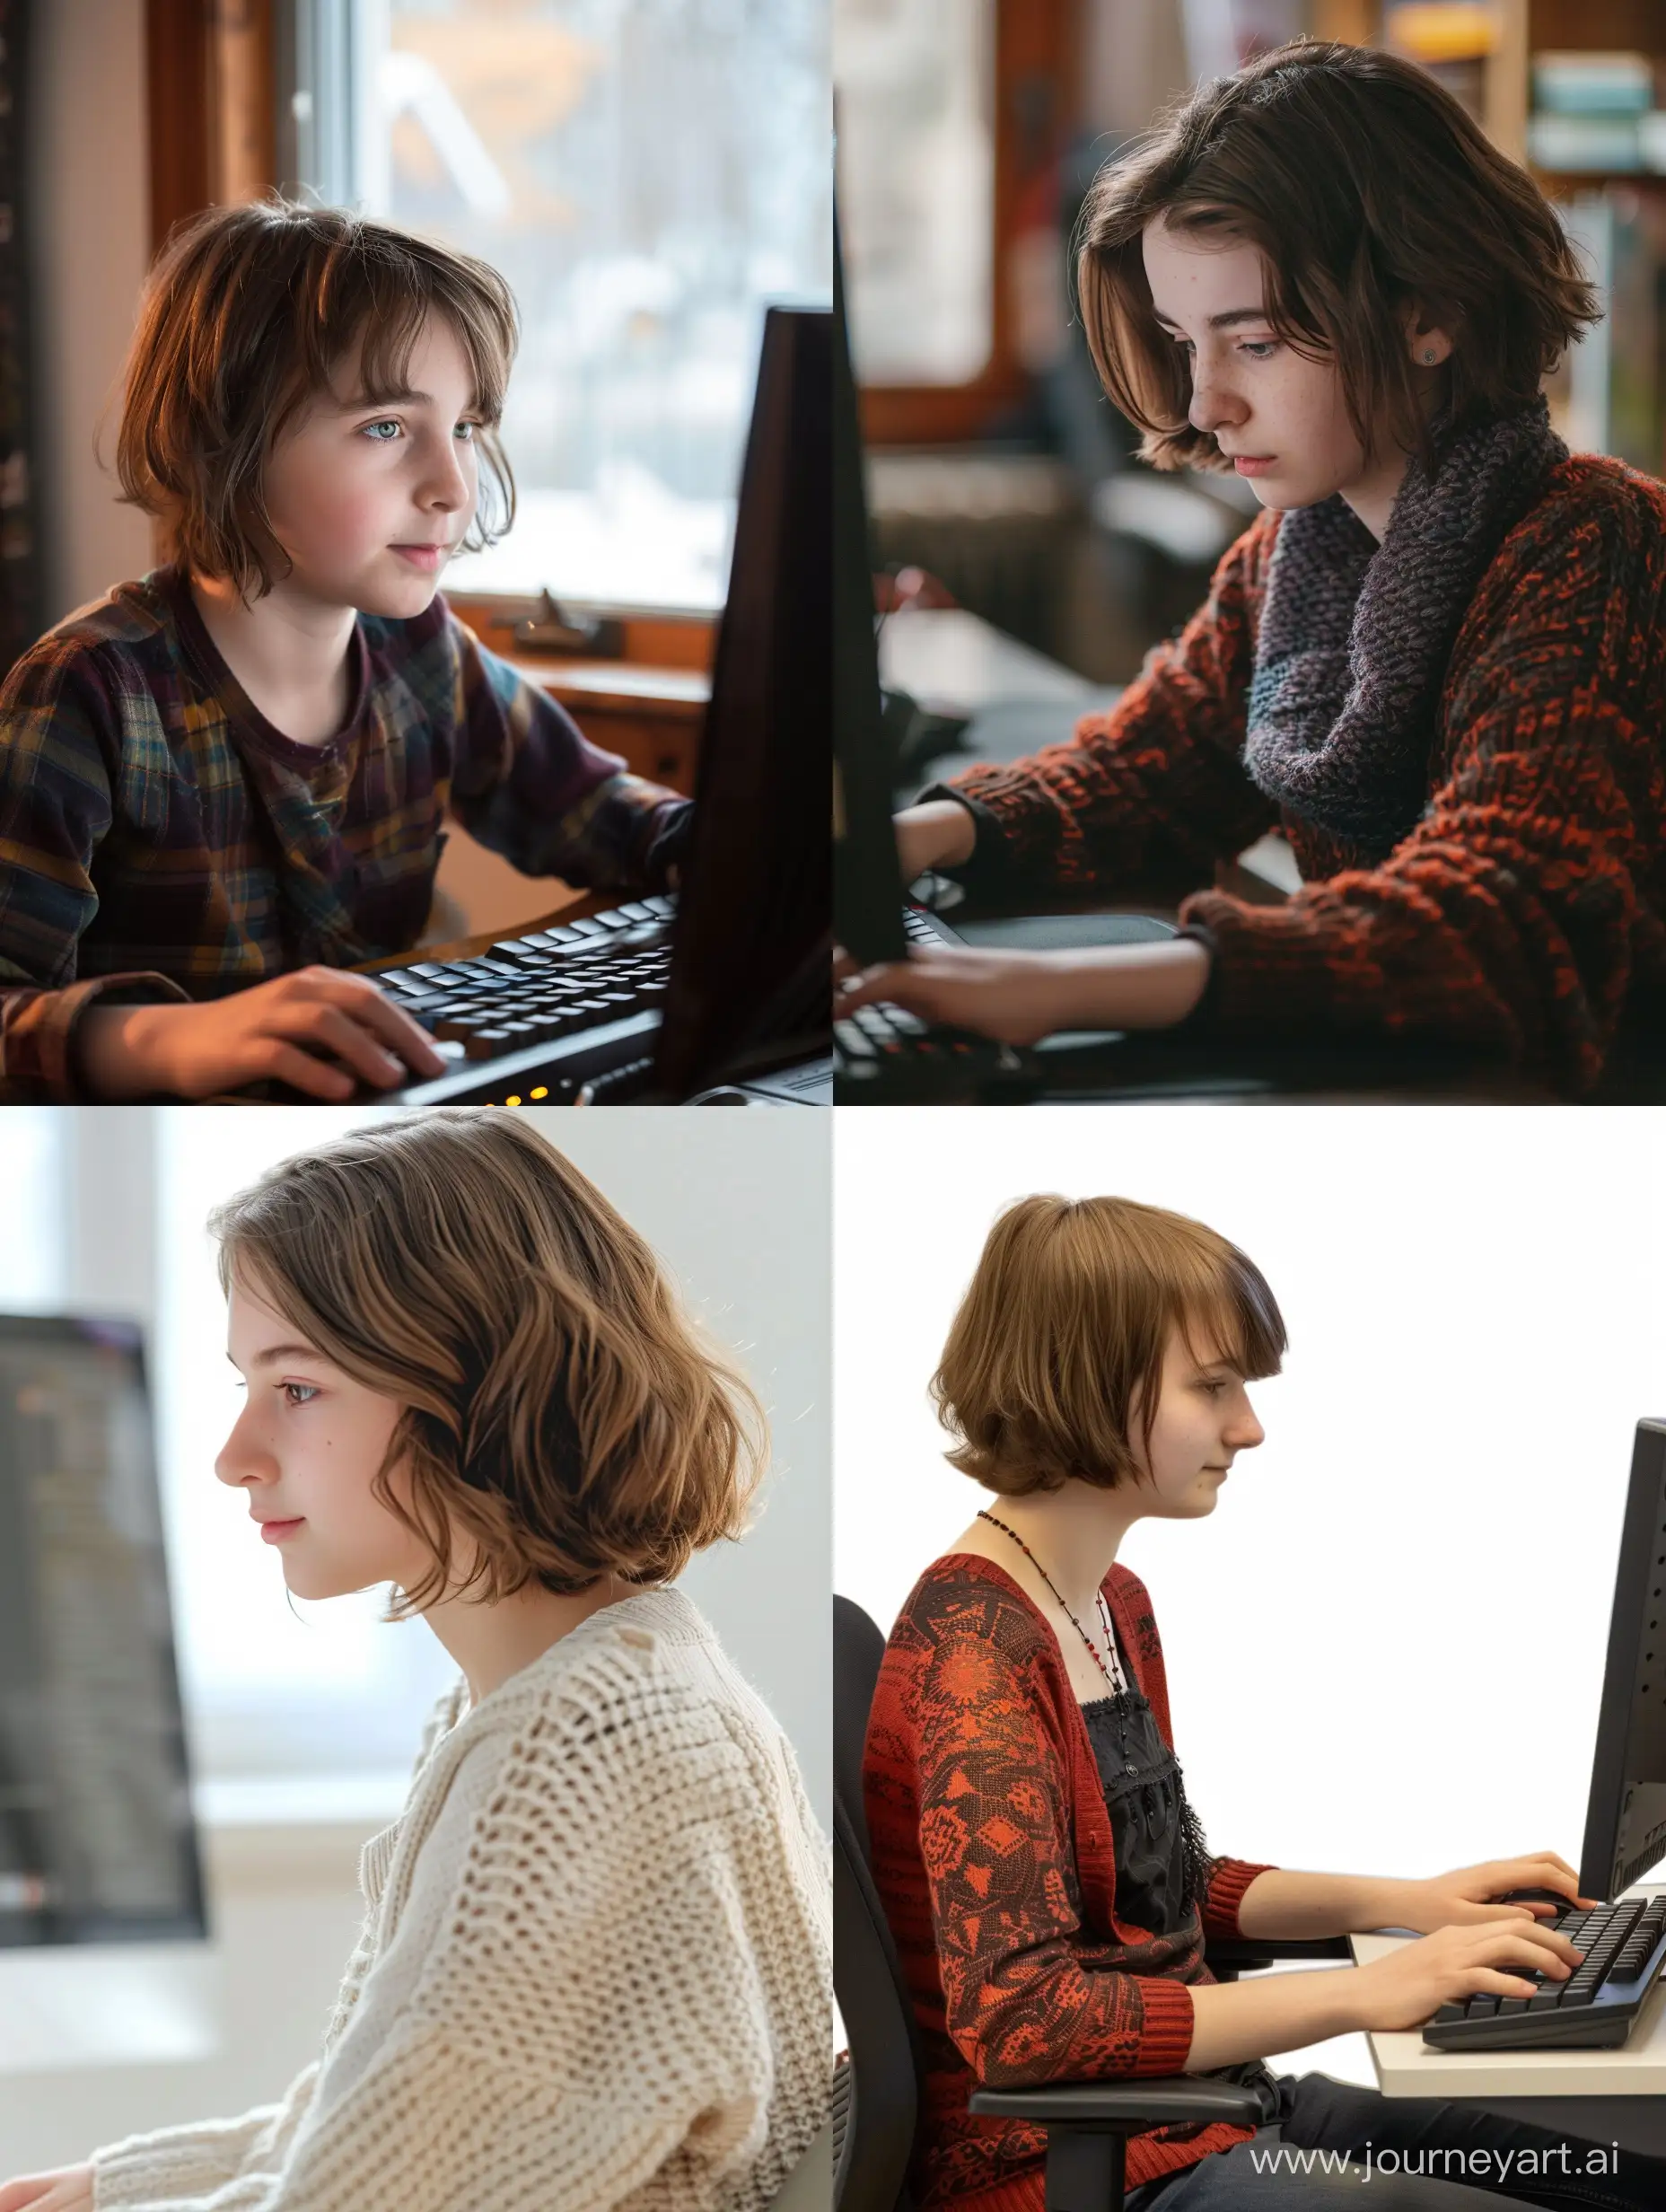 Young-Girl-with-Short-Brown-Hair-Playing-Computer